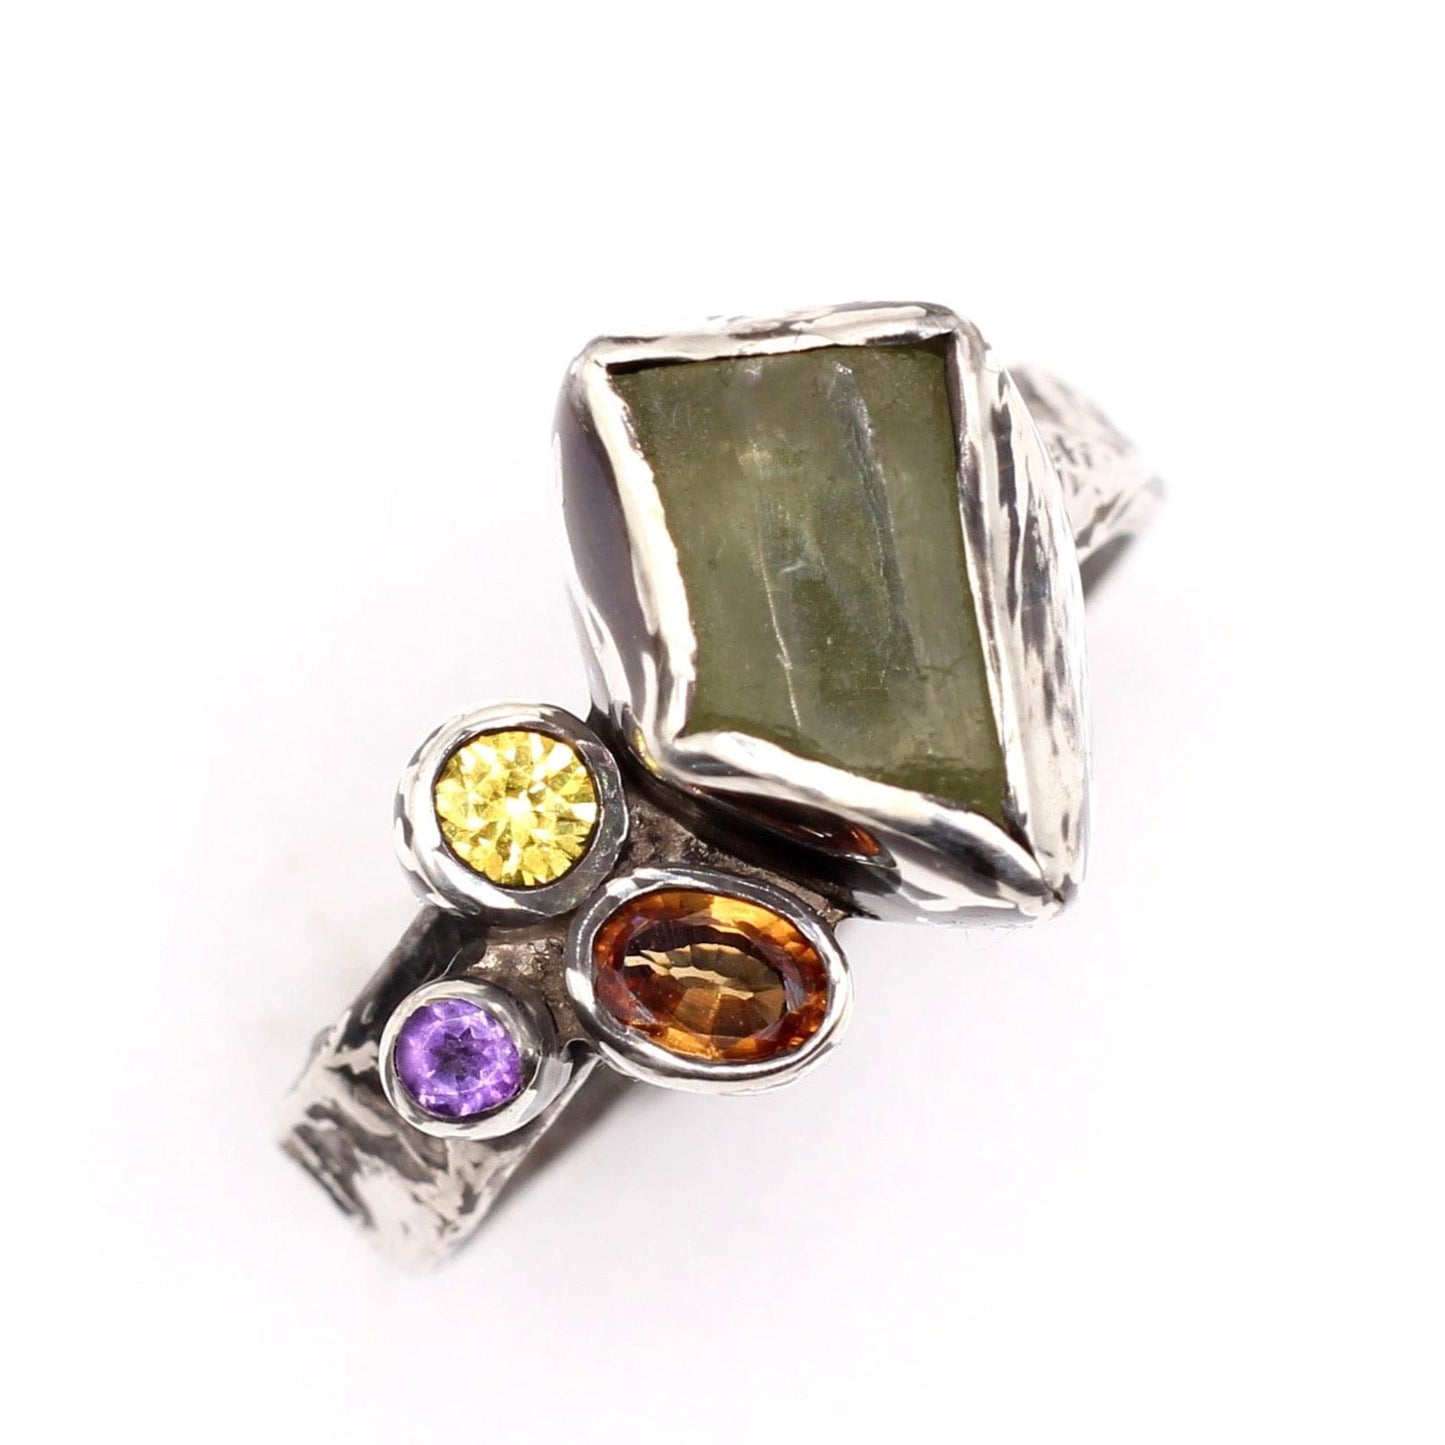 Candice Ring - Citrine, Sapphire and Amethyst Cluster with Textured Silver Band